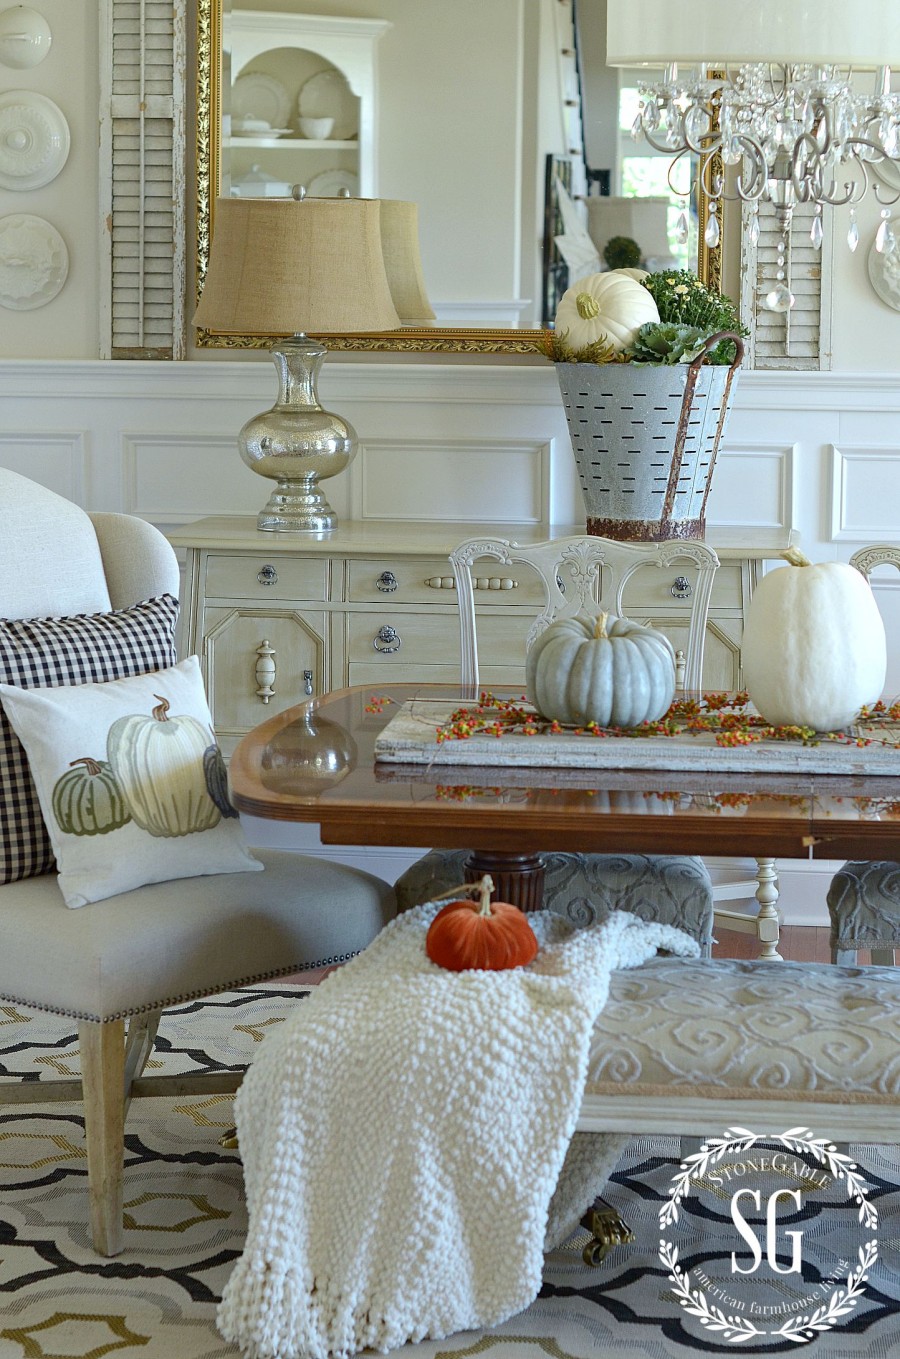 FALL HOME TOUR-bringing the natural element of fall inside. Lots of easy inspiration stonegableblog.com